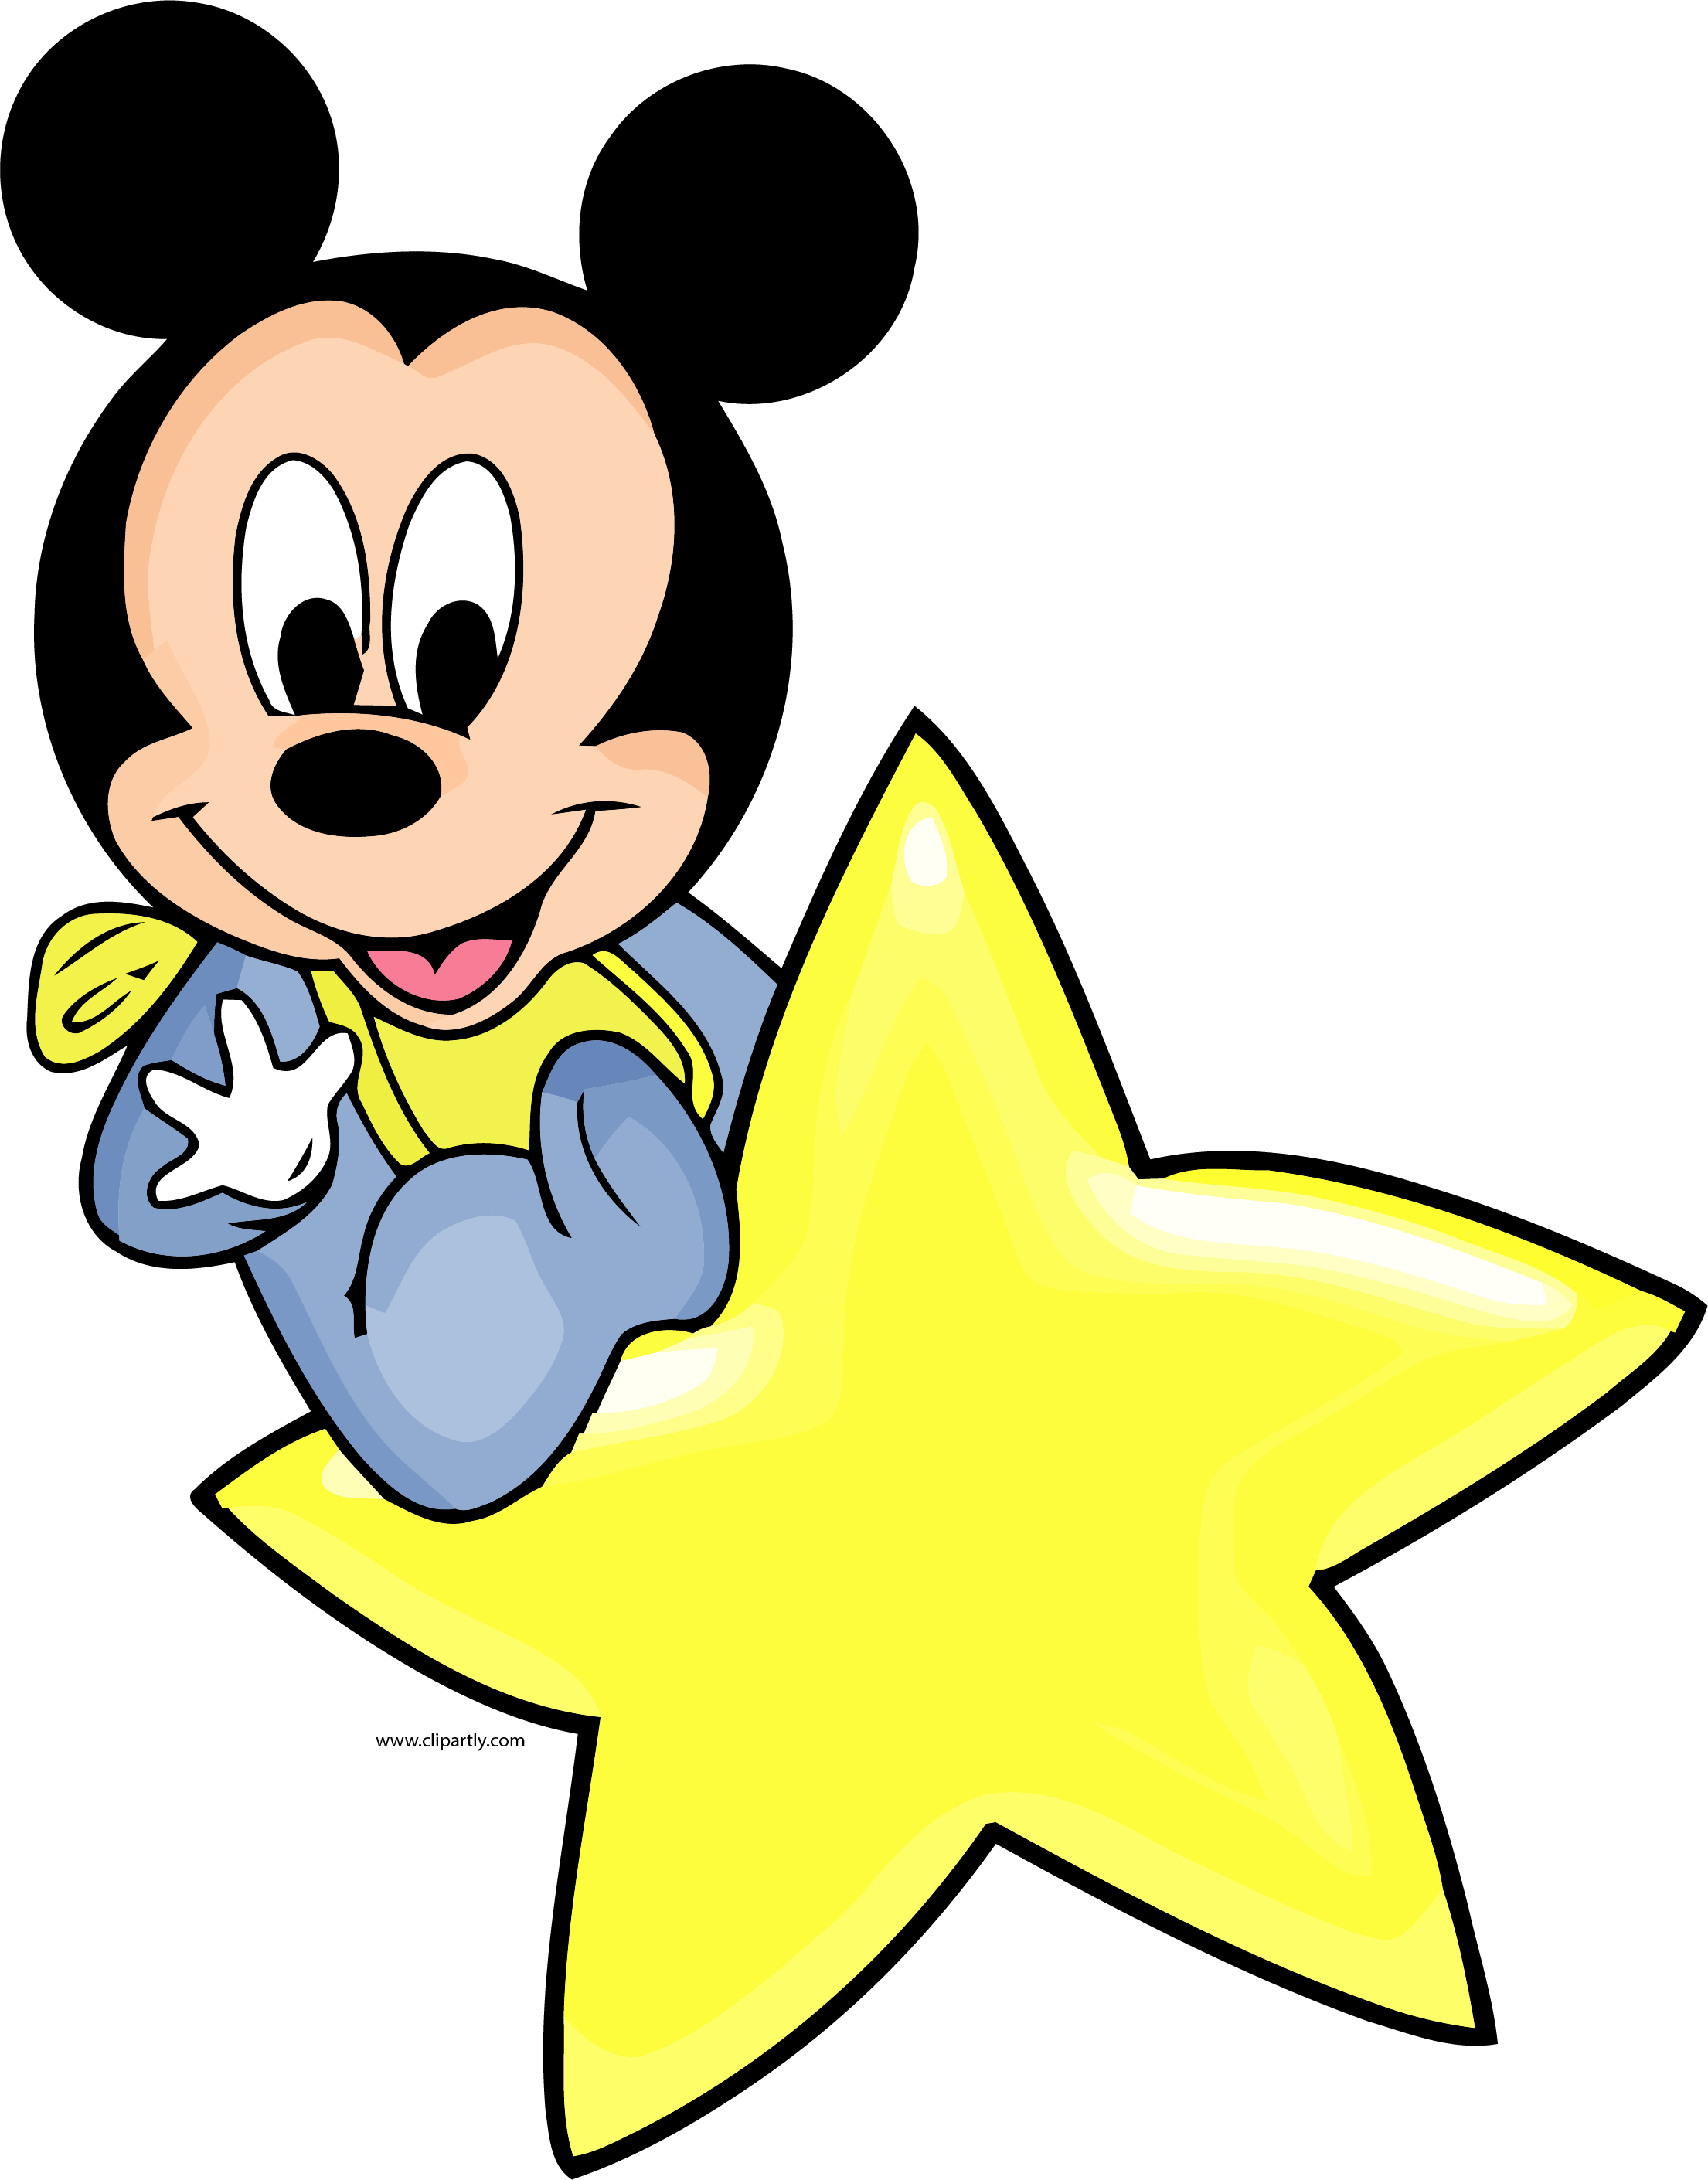 Disney png clipartly comclipartly. Baby clipart star